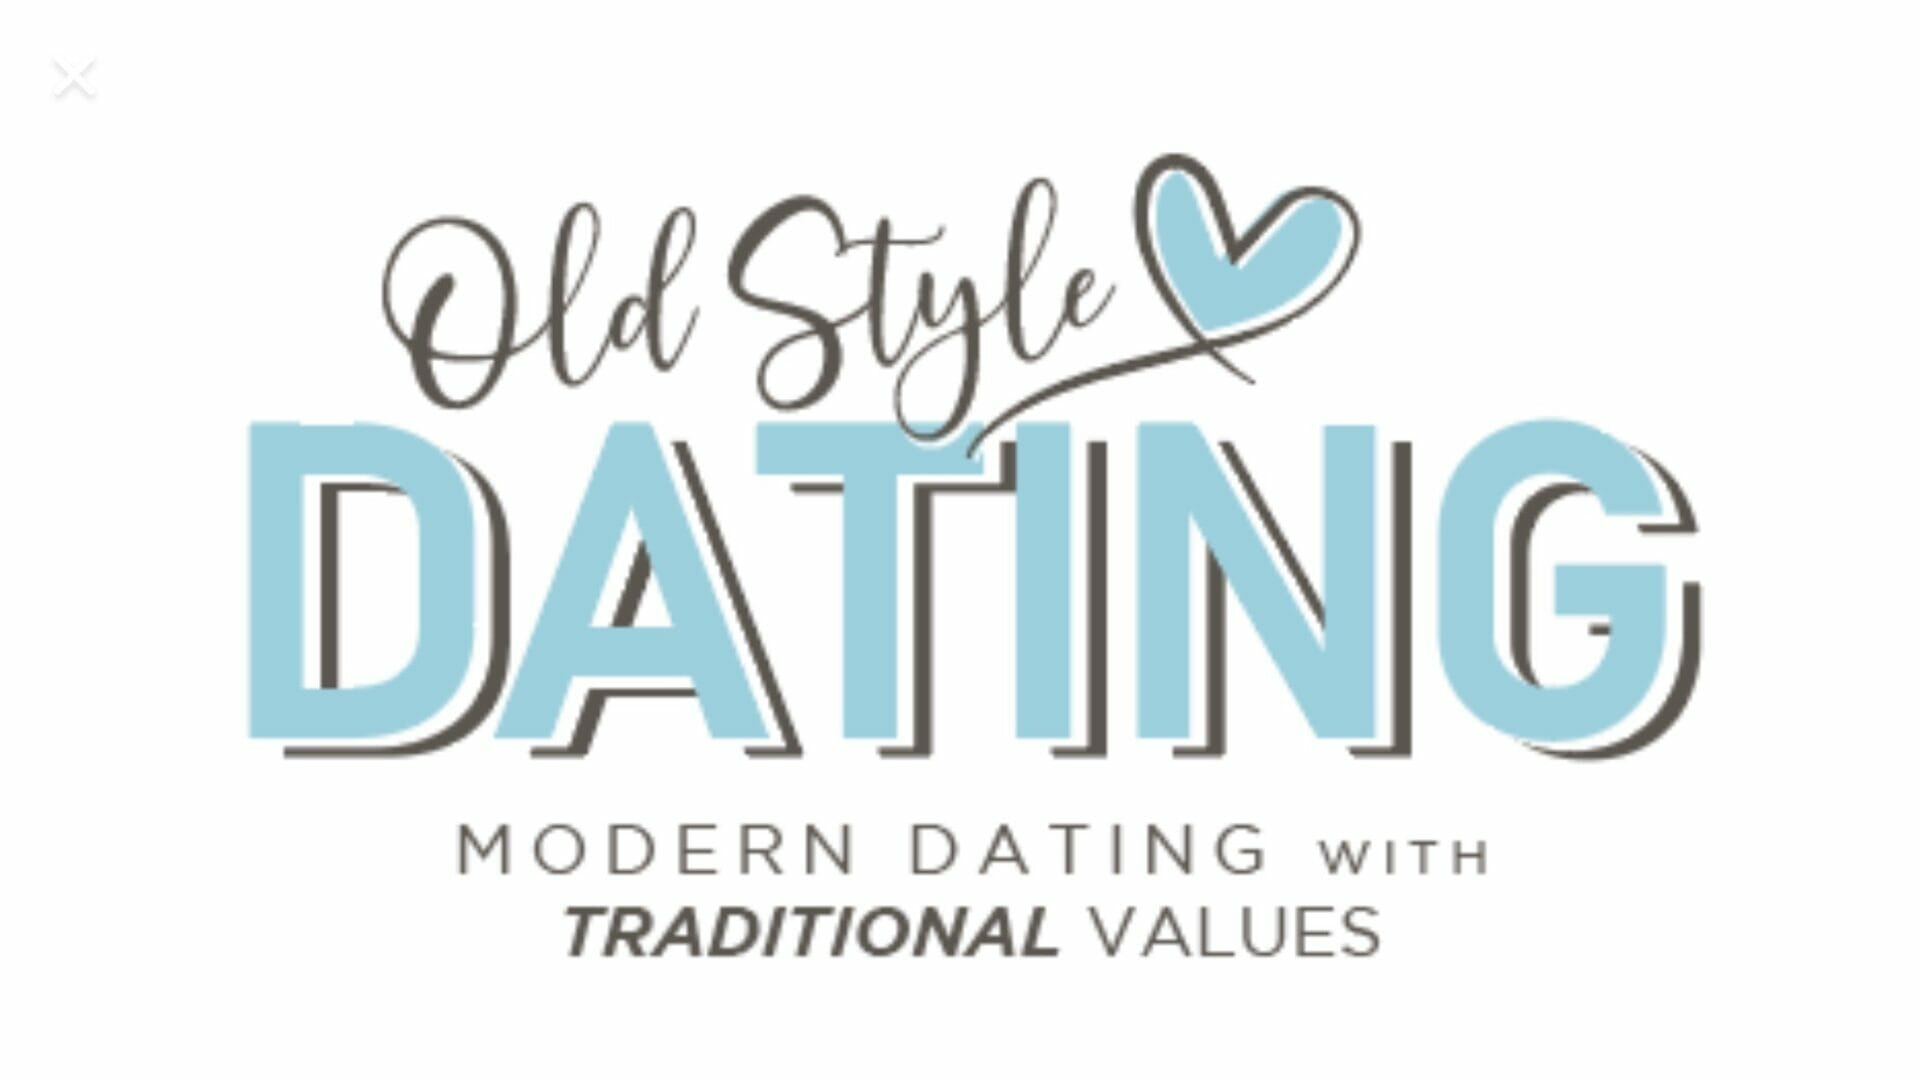 Old Style dating launches new site !   @oldstyledating_